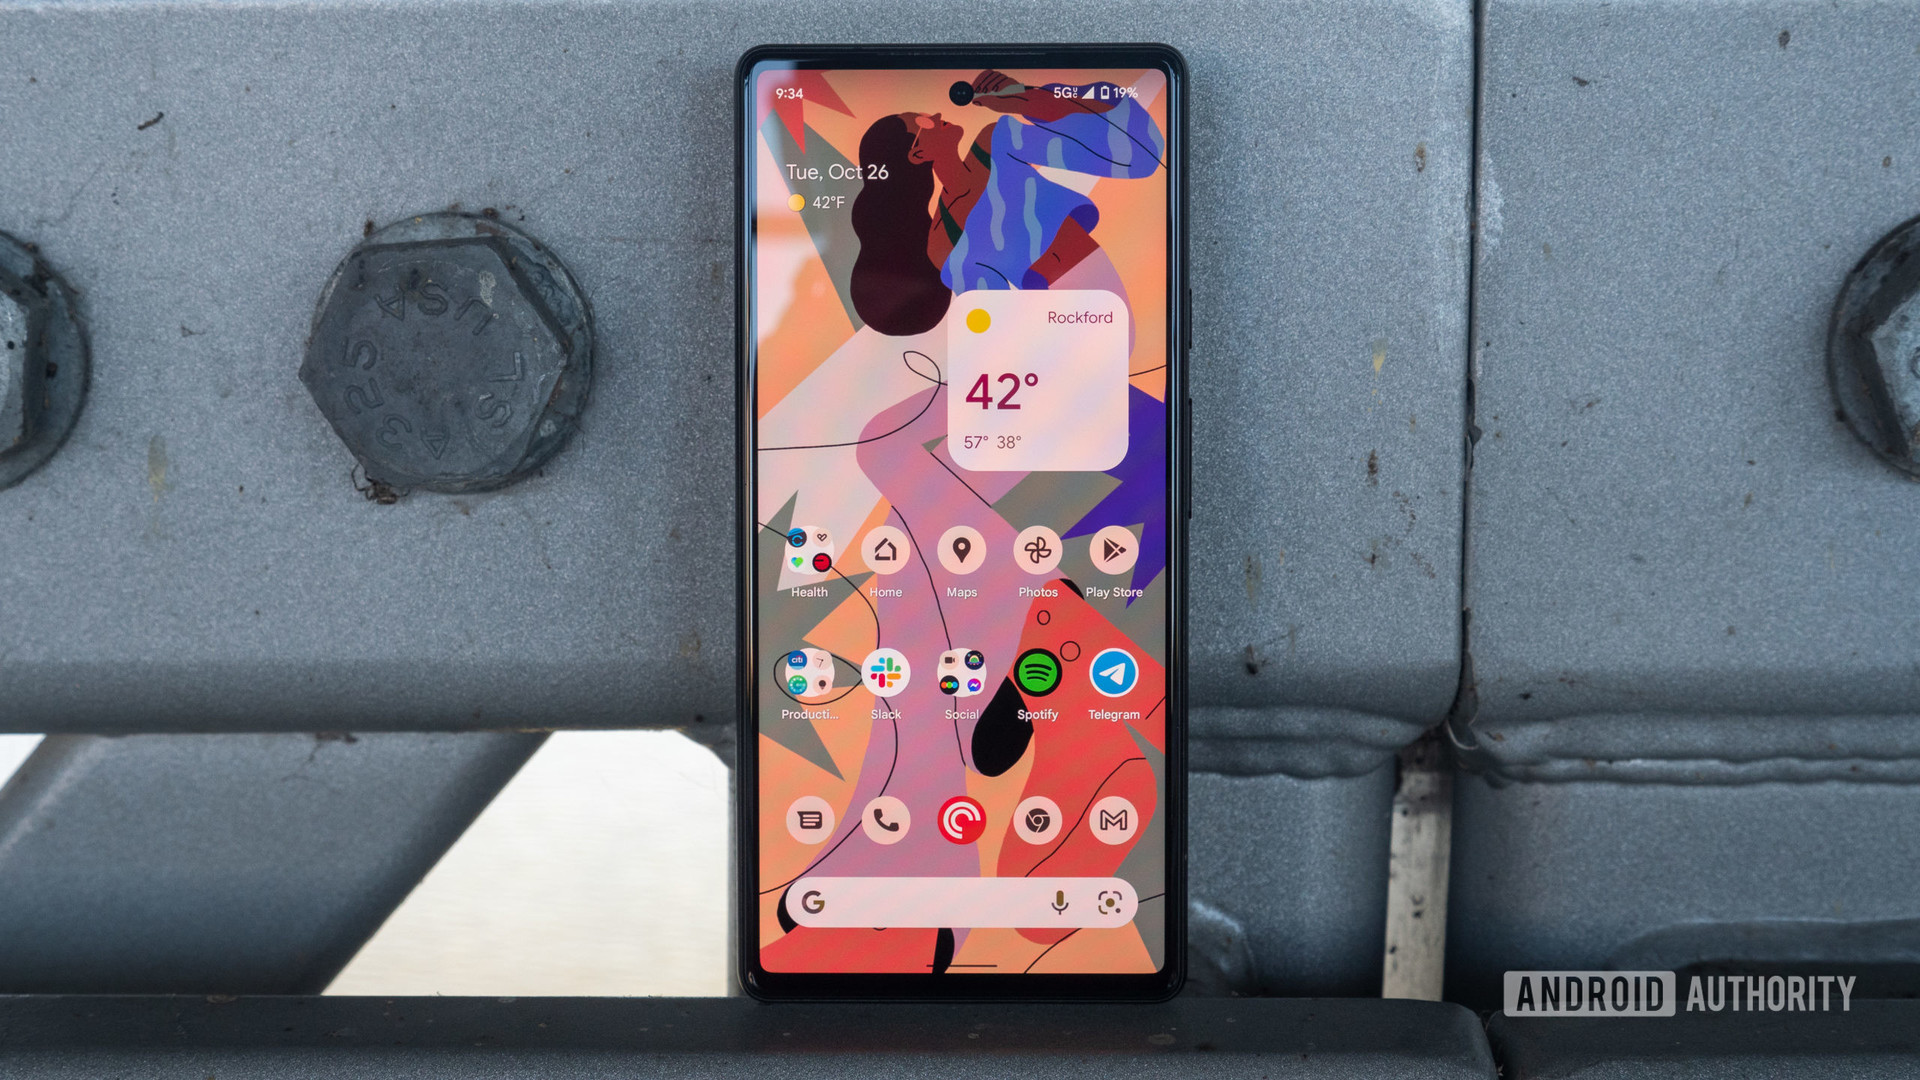 The Google Pixel 6 leans against a bridge, showing the home screen and display up close